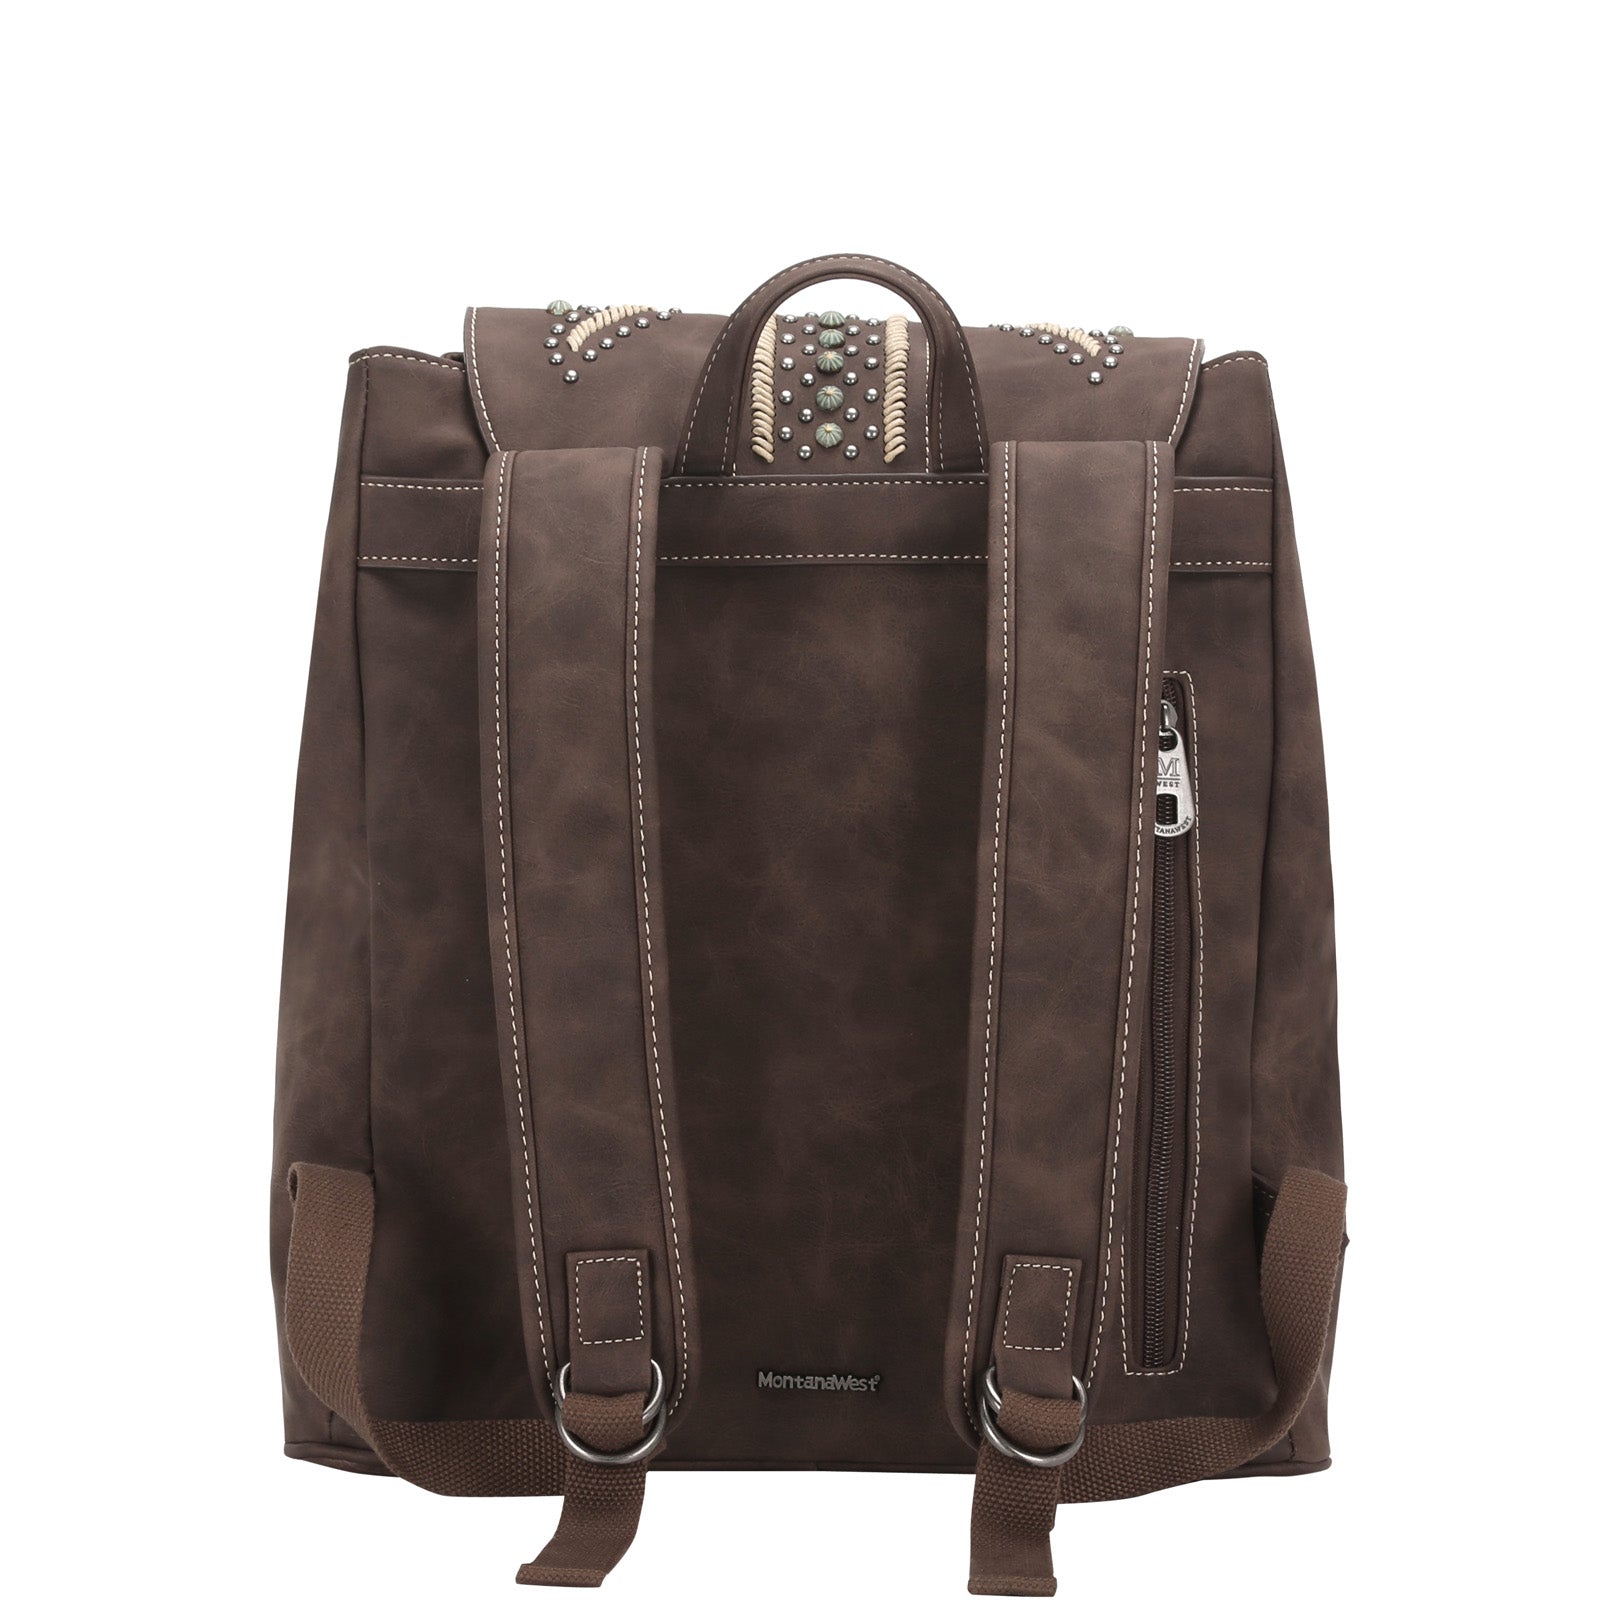 Montana West Concho Collection Backpack - Cowgirl Wear